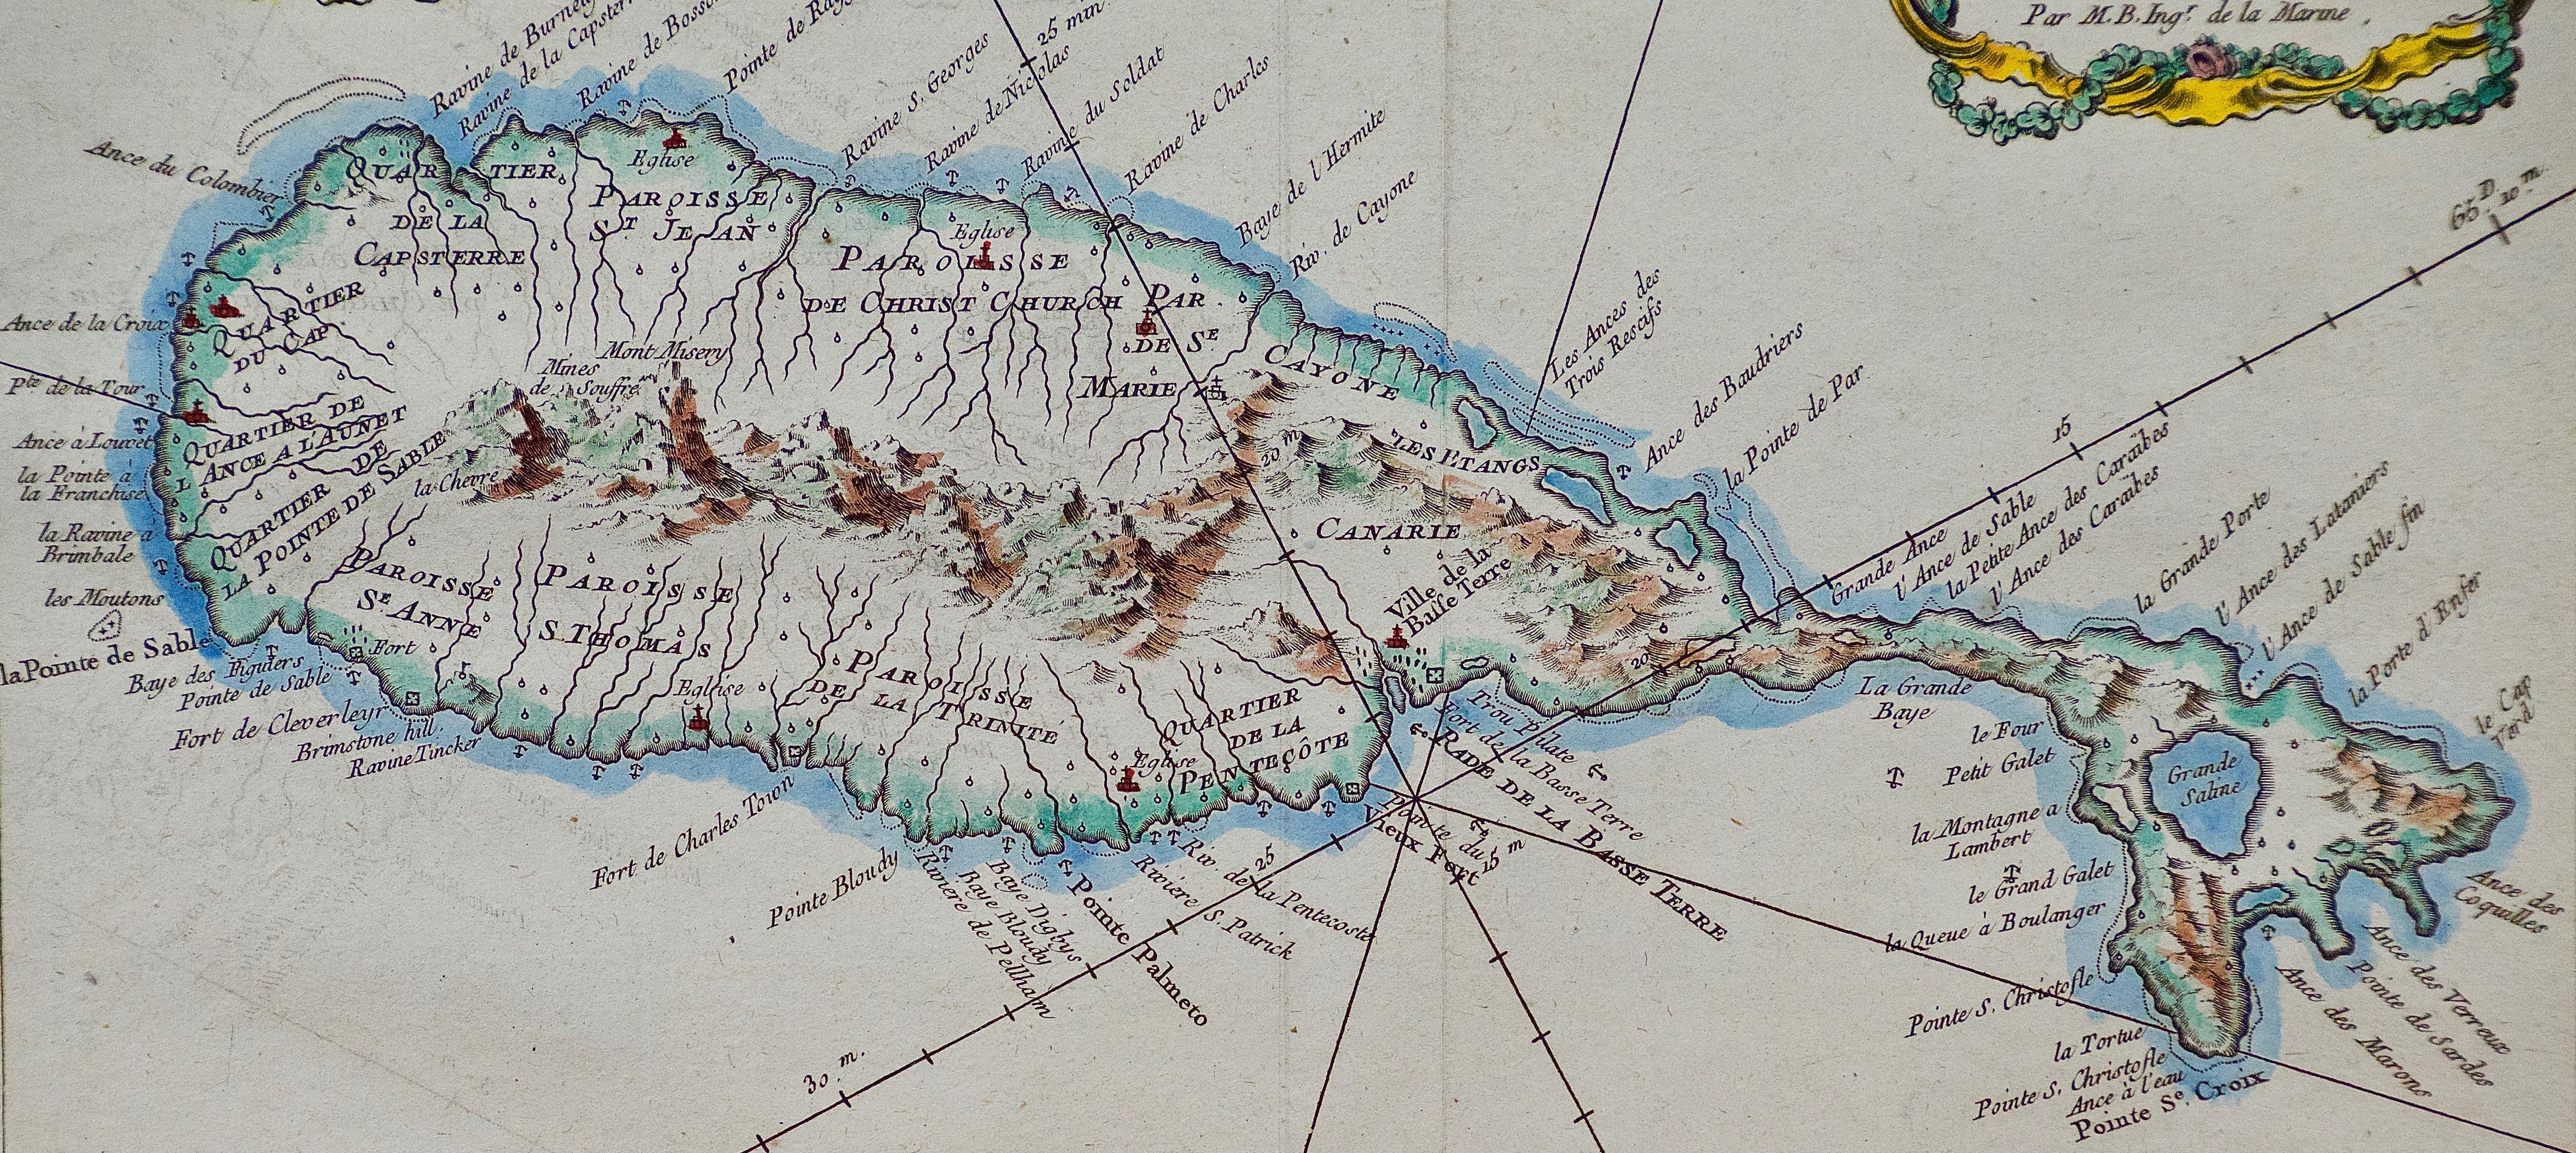 Bellin 18th Century Hand Colored Map of St. Christophe (St. Kitts) - Other Art Style Print by Jacques Nicolas Bellin